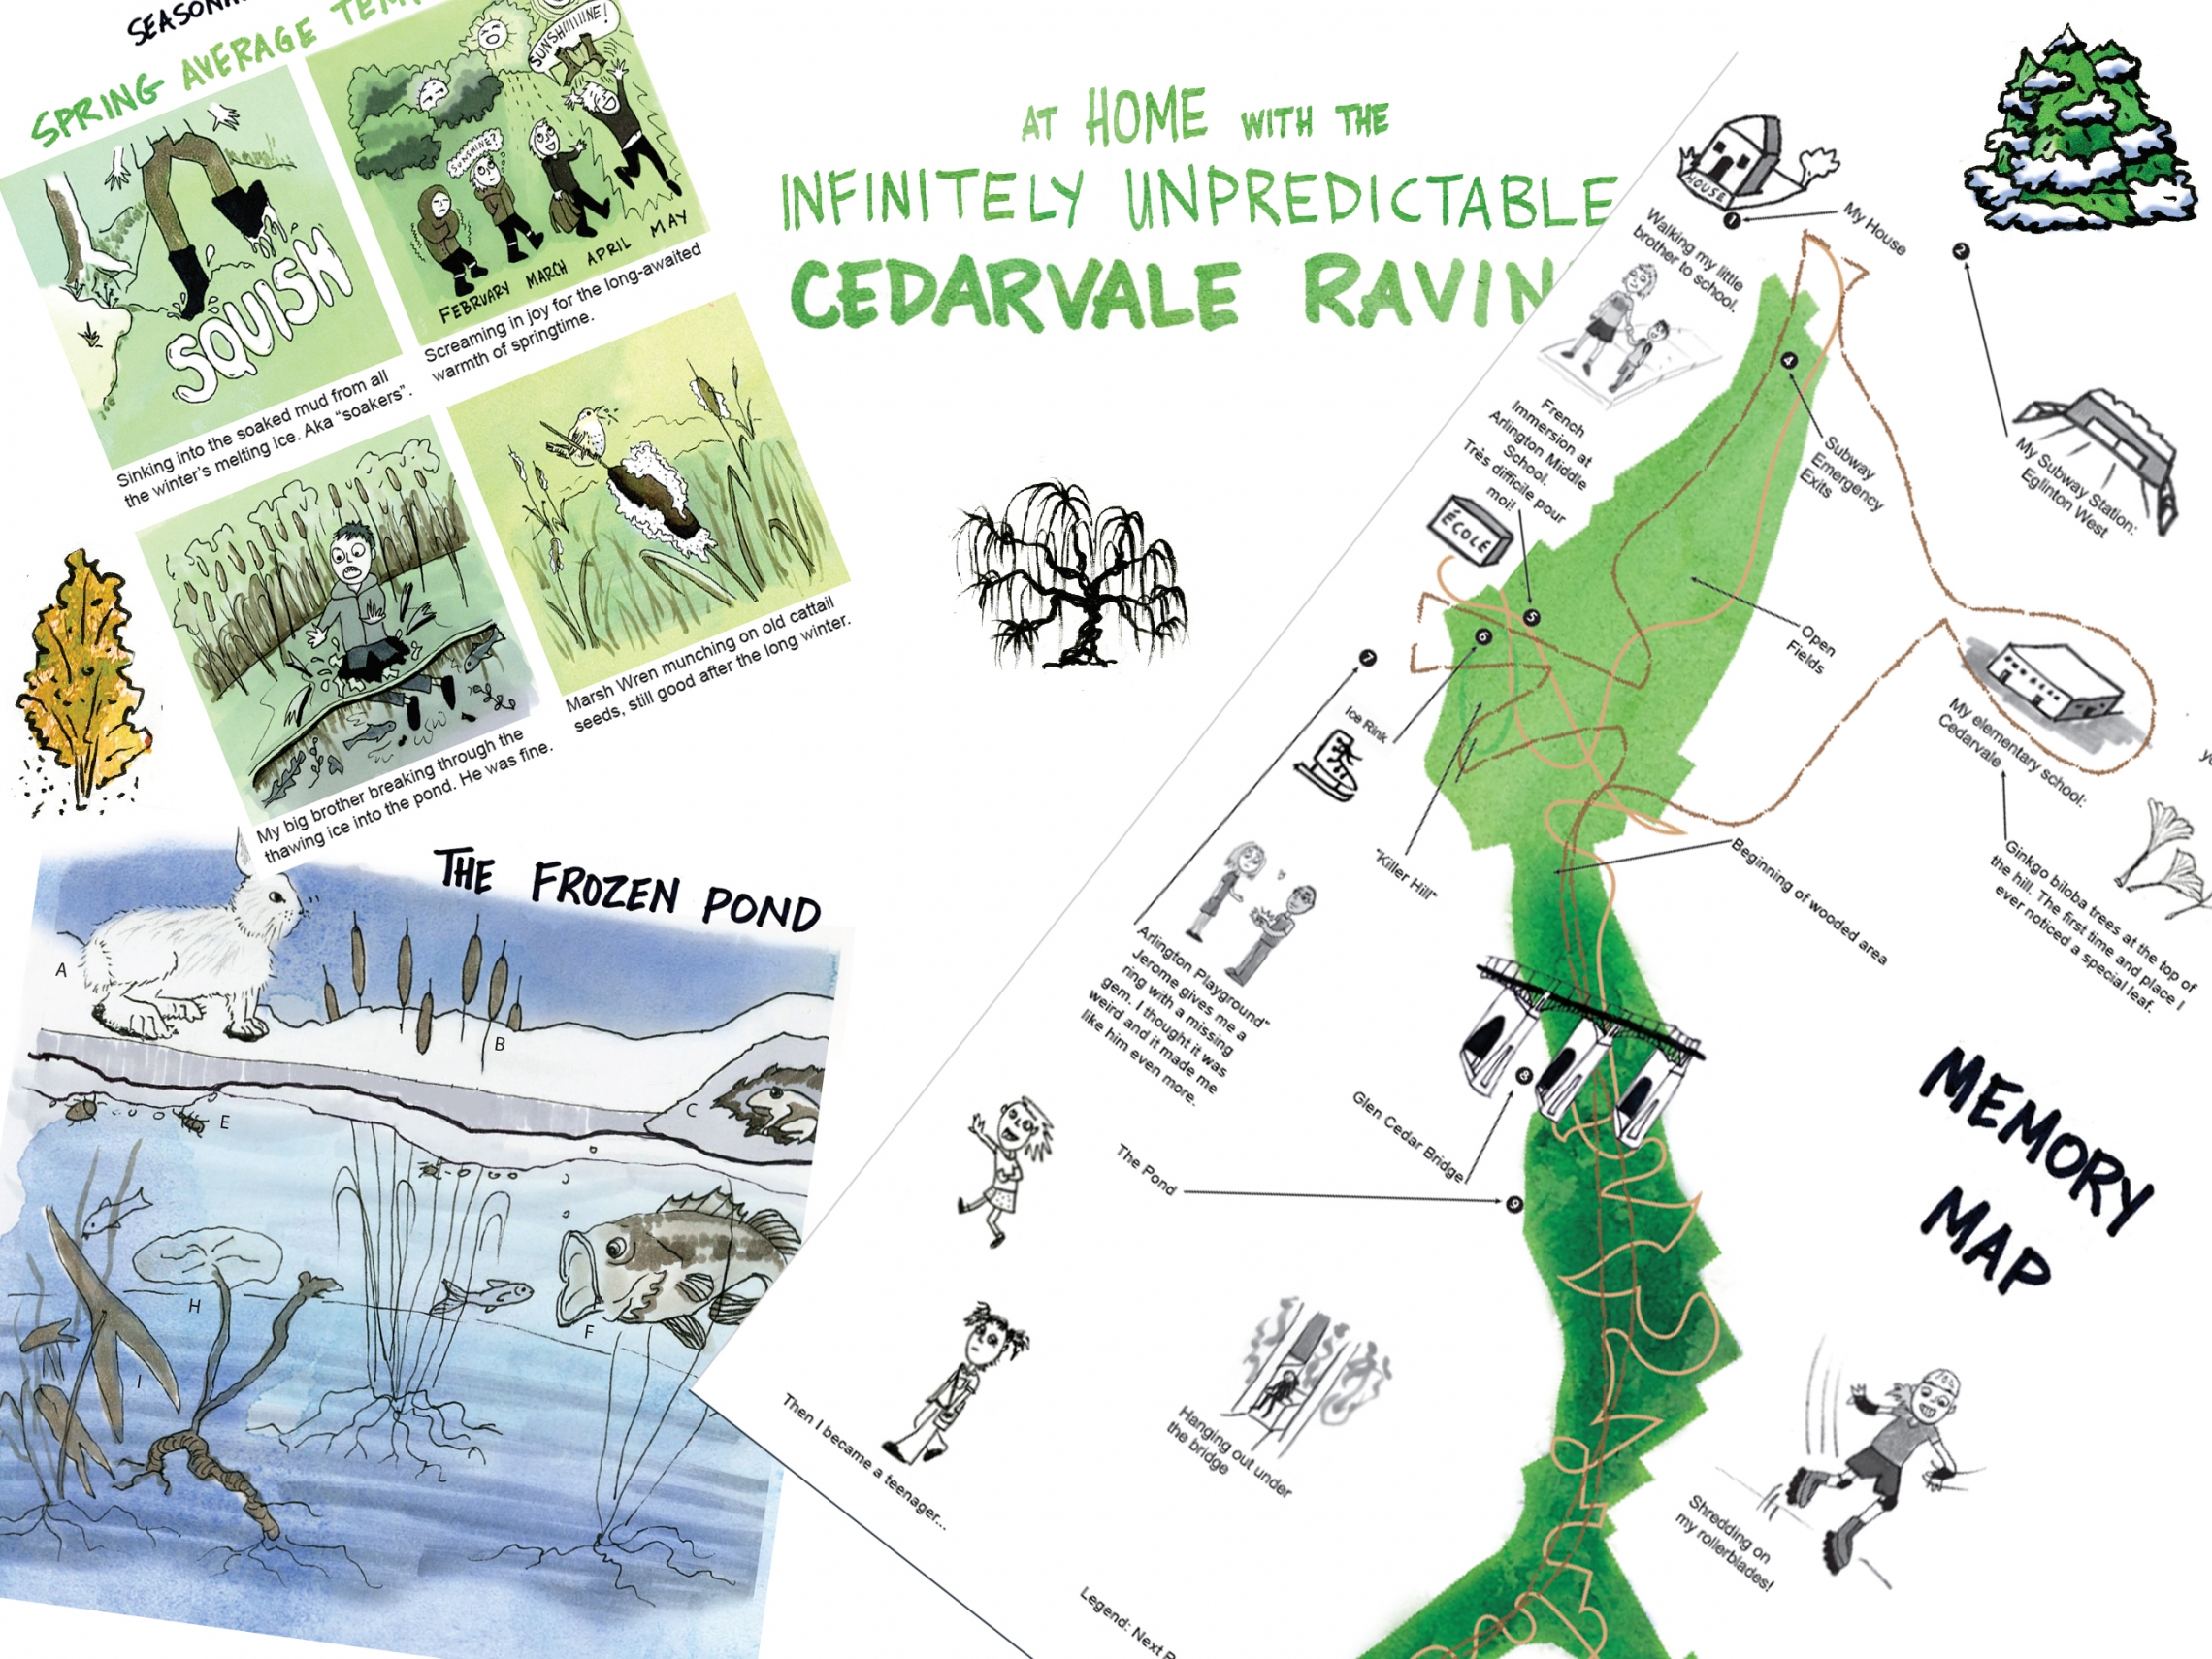 Montage from At Home with the Infinitely Unpredictable Cedarvale Ravine by Adrian Tenney